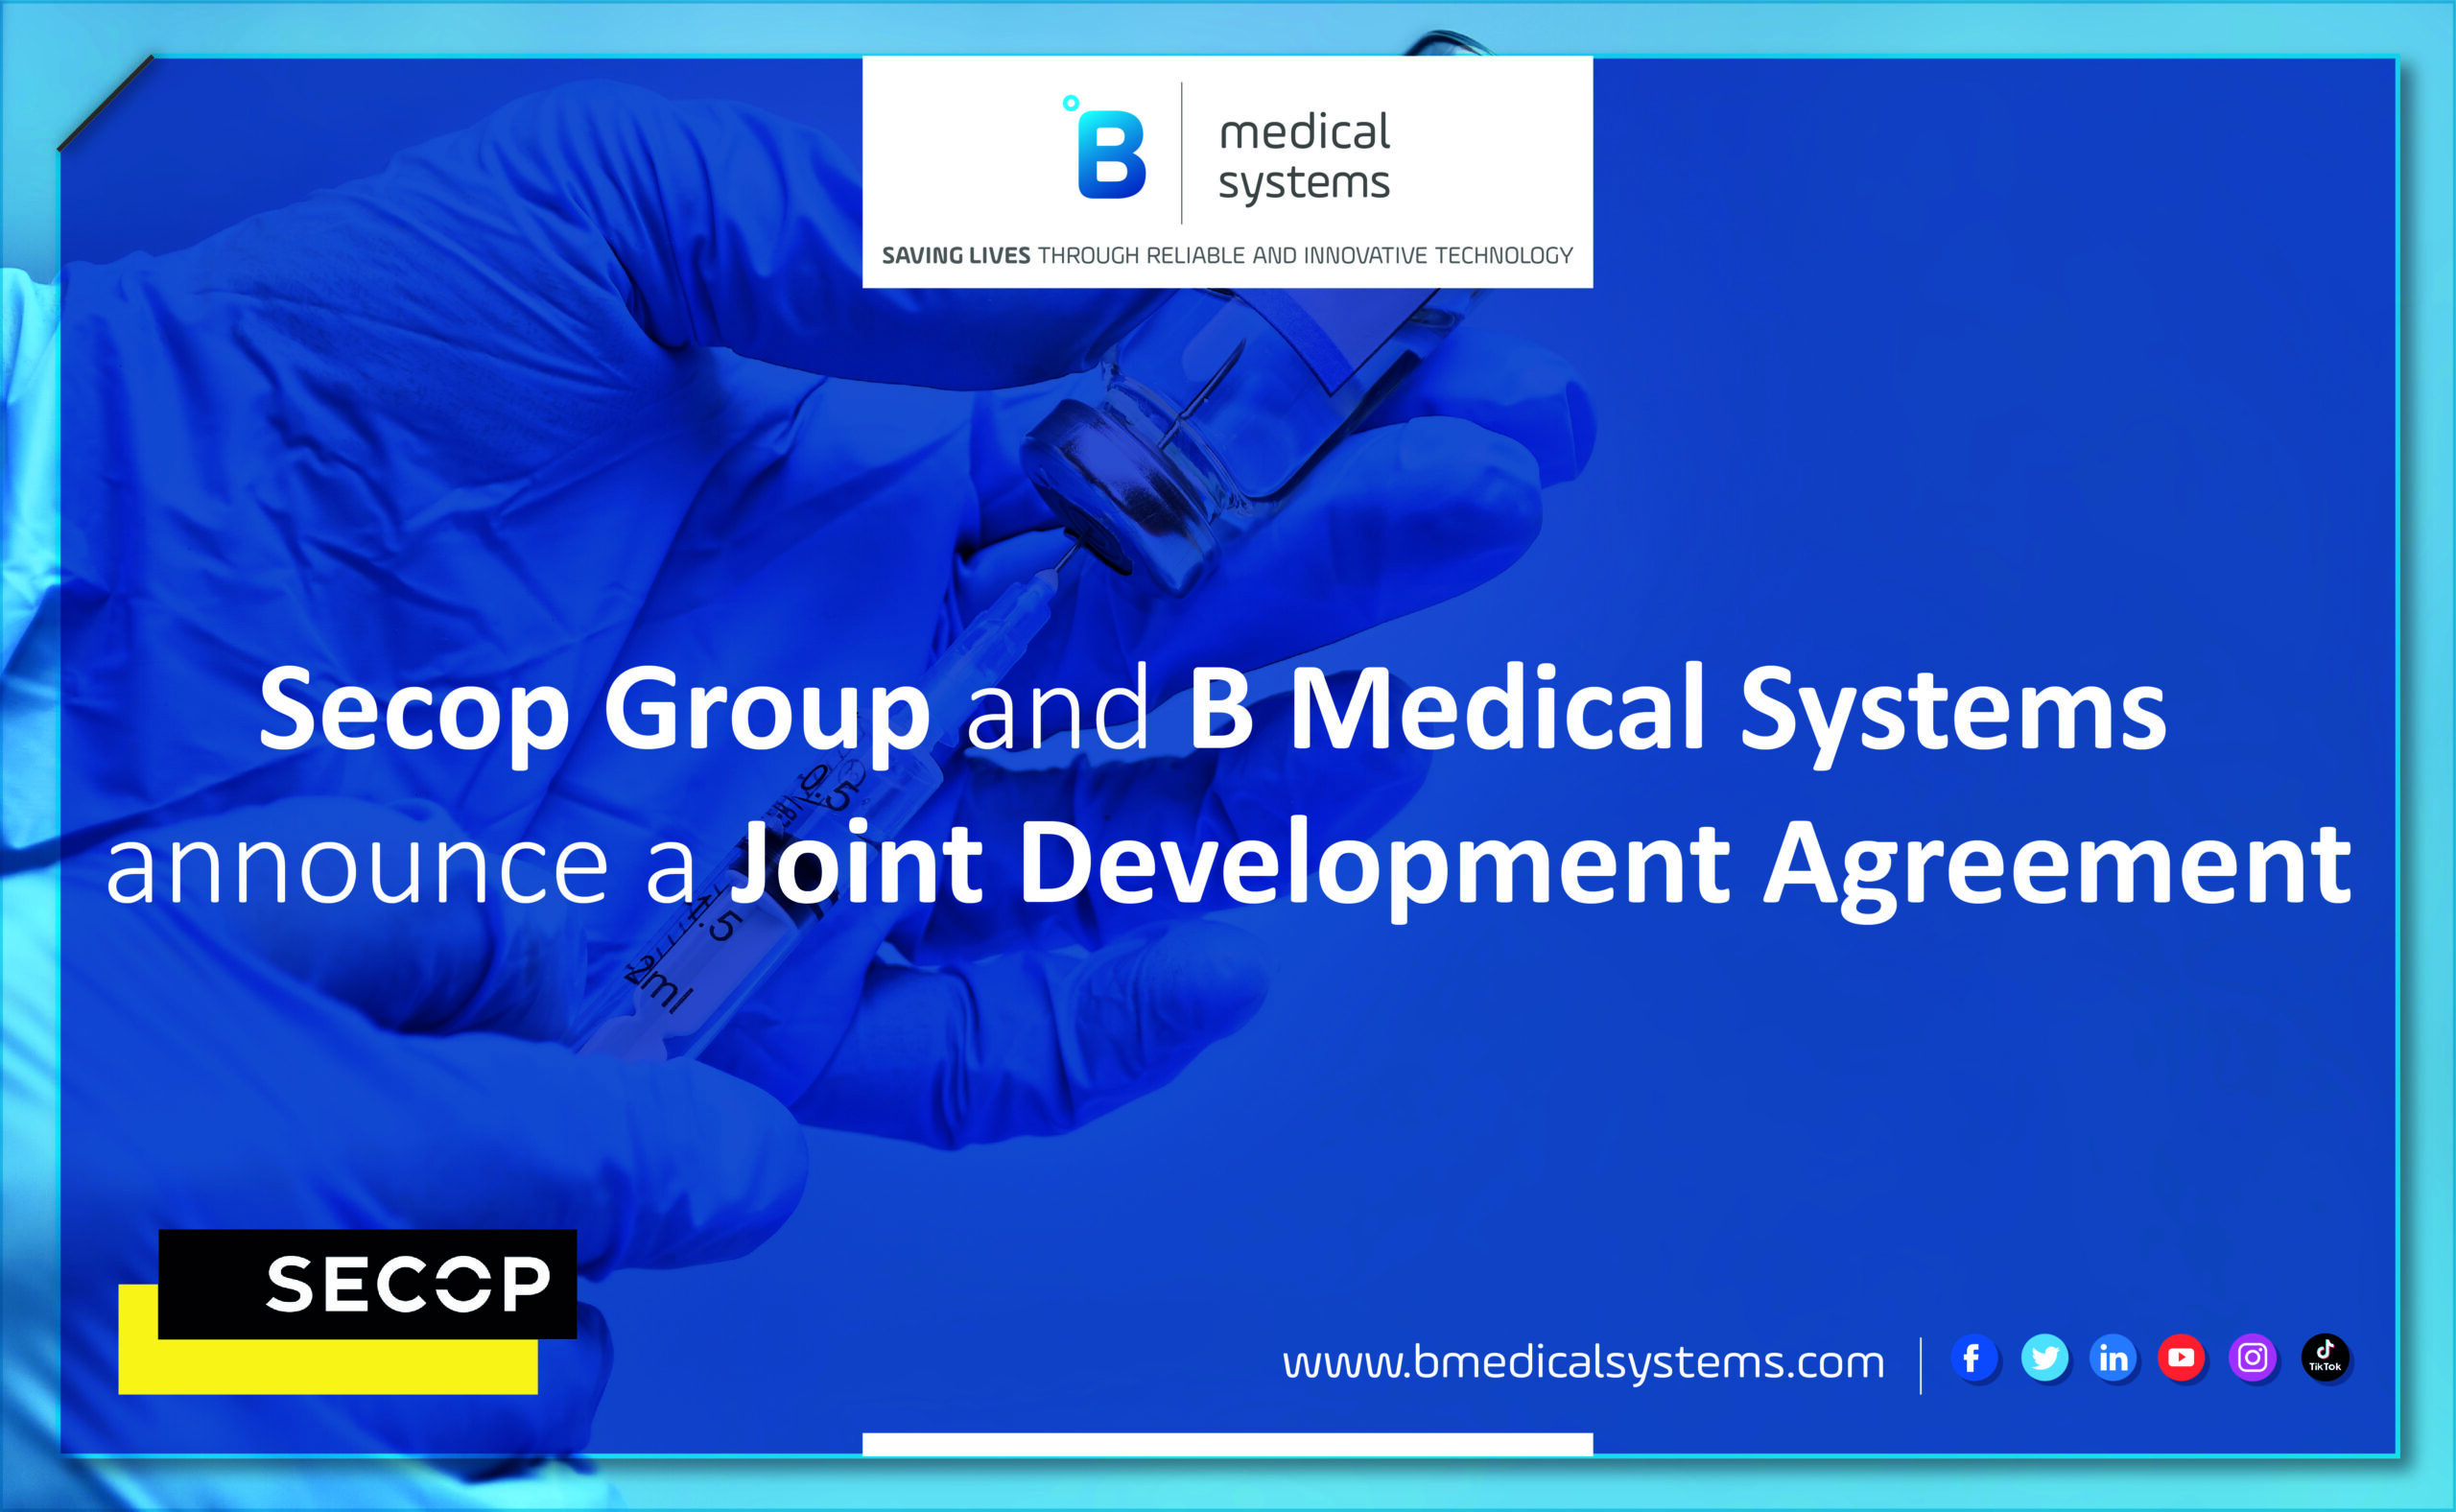 Secop Group and B Medical Systems announce a Joint Development Agreement